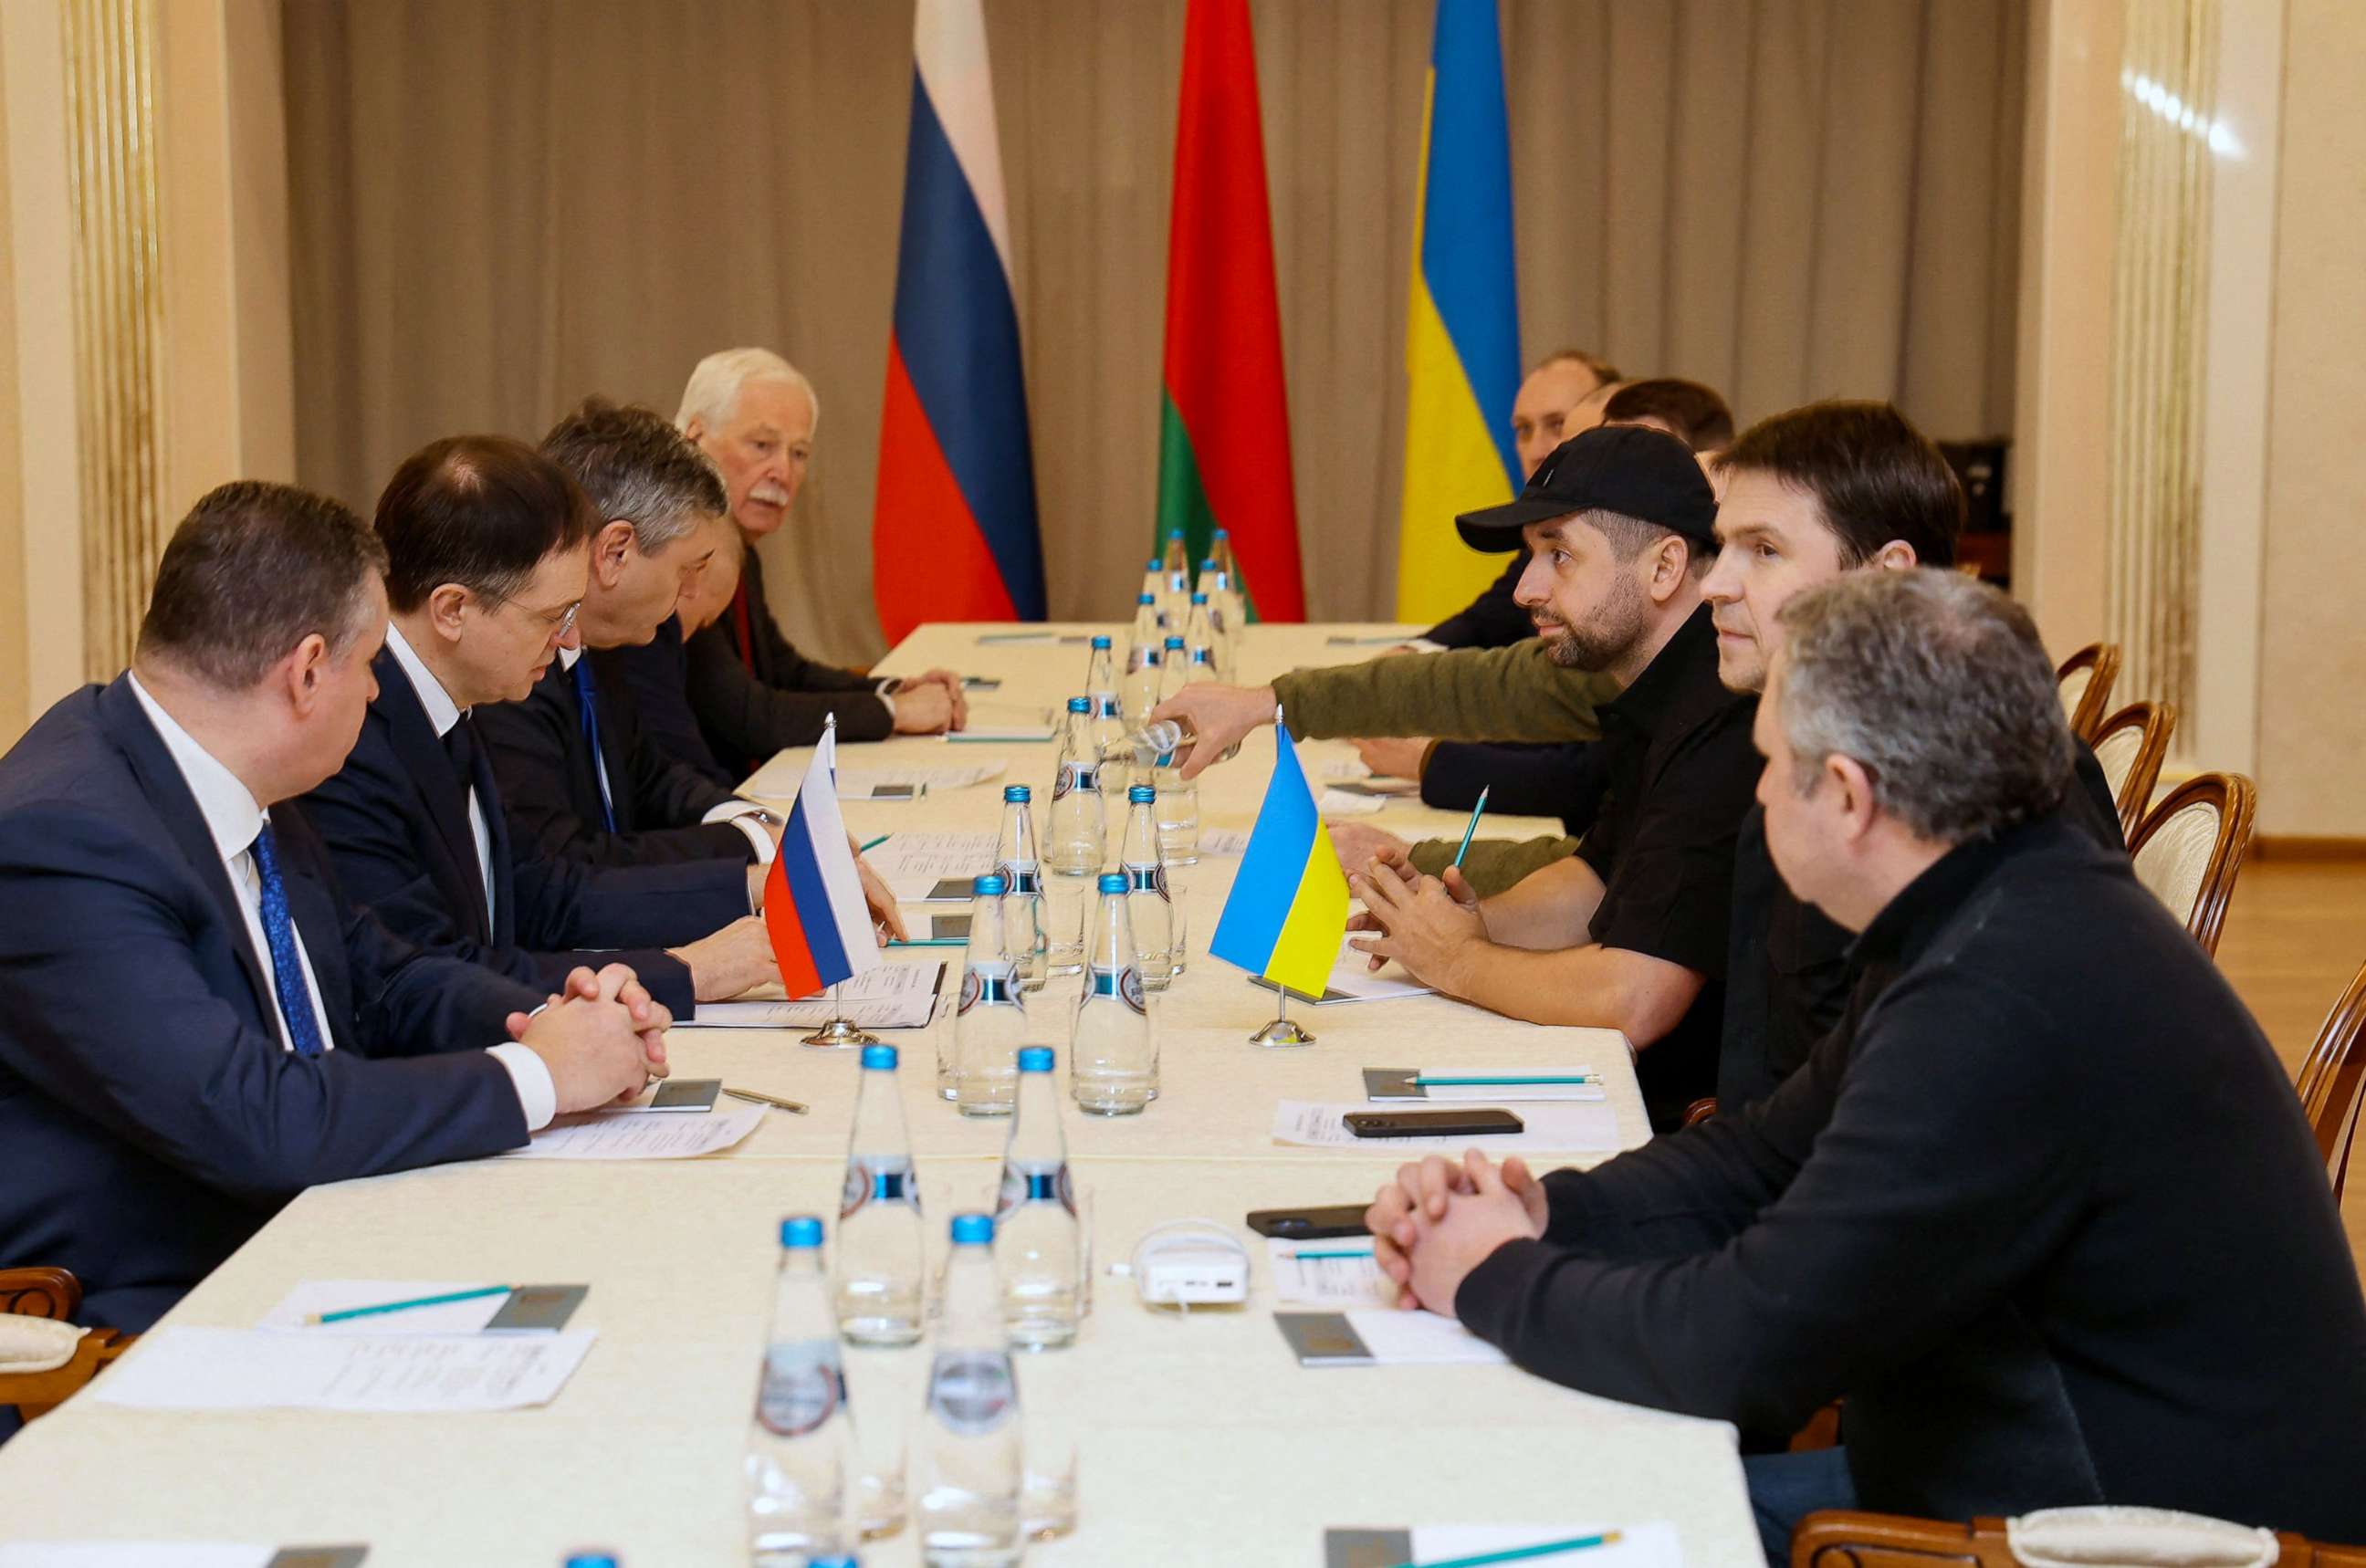 PHOTO: Members of delegations from Ukraine and Russia, including Russian presidential aide Vladimir Medinsky, Ukrainian presidential aide Mykhailo Podolyak, and Ukrainian lawmaker Davyd Arakhamia, hold talks in Belarus on Feb. 28, 2022.